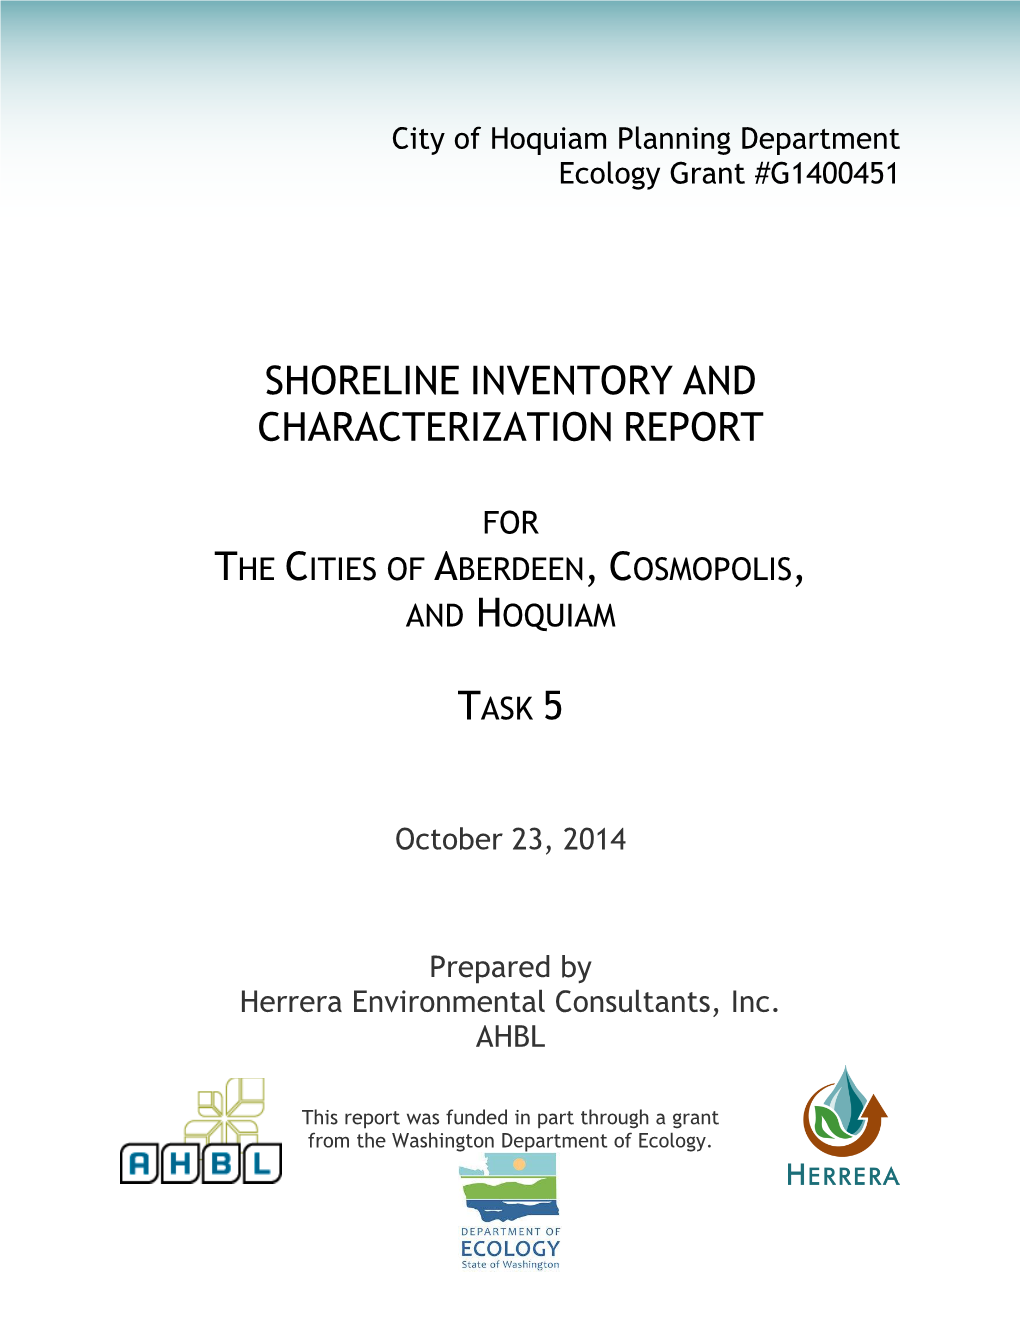 Shoreline Inventory and Characterization Report